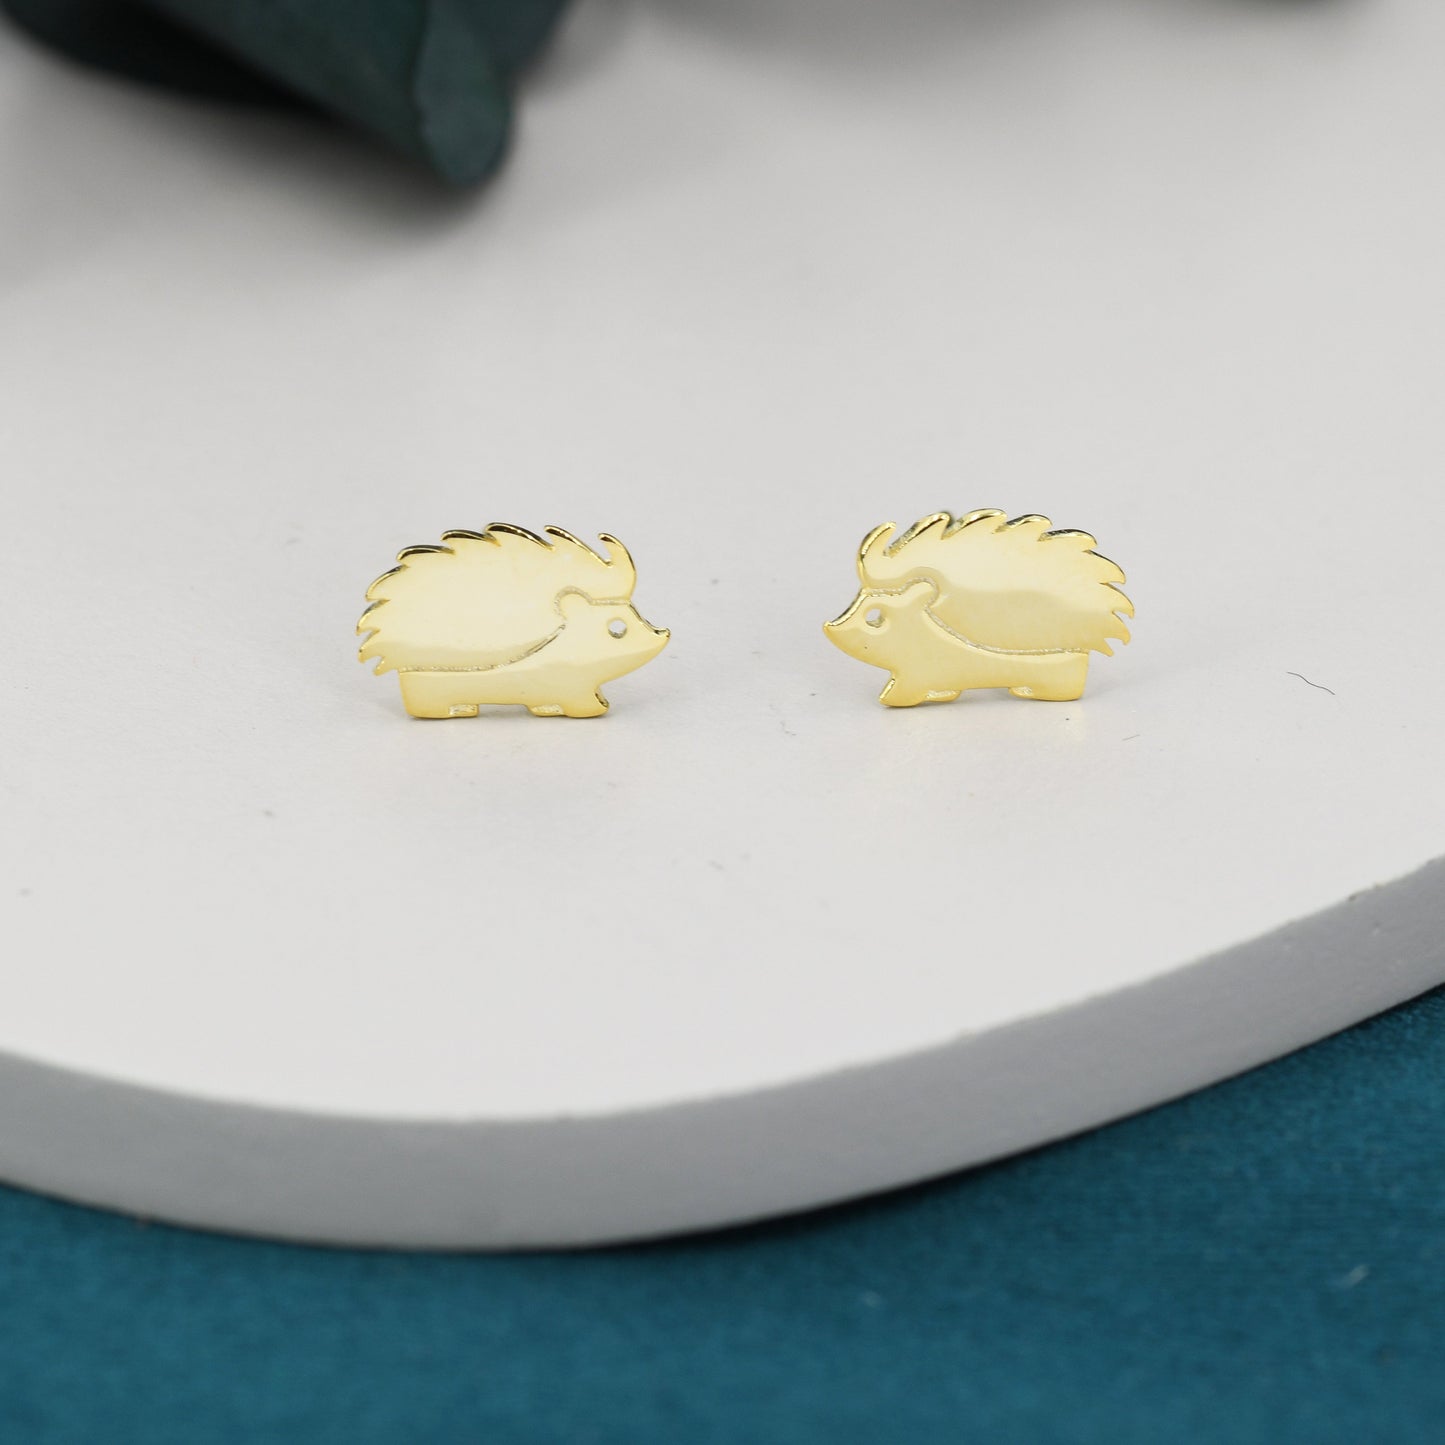 Hedgehog Stud Earrings in Sterling Silver, Silver or Gold, Cute Fun and Quirky Animal Jewellery, Woodland Inspired.